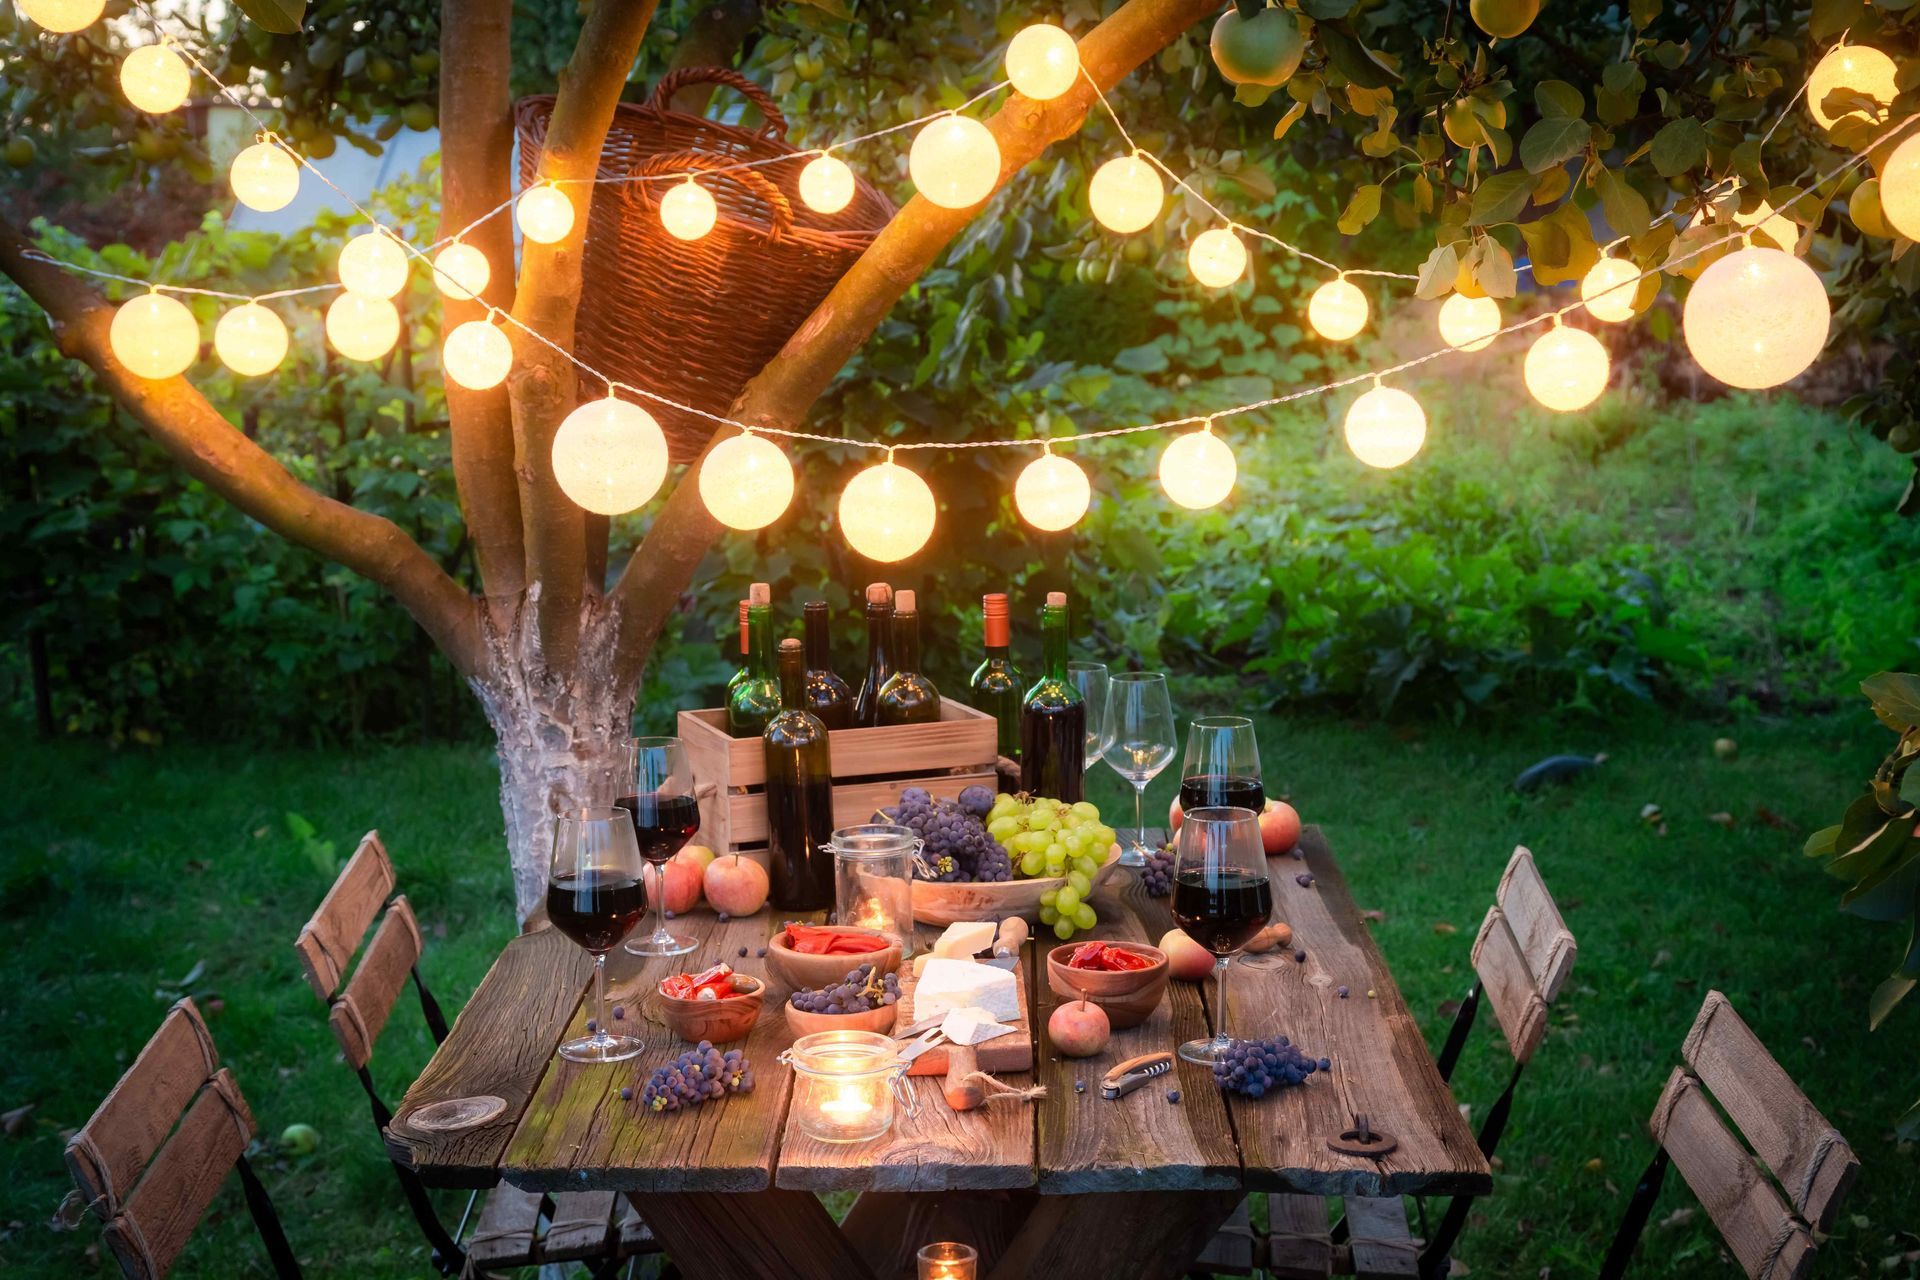 String lights over a picnic table filled with food